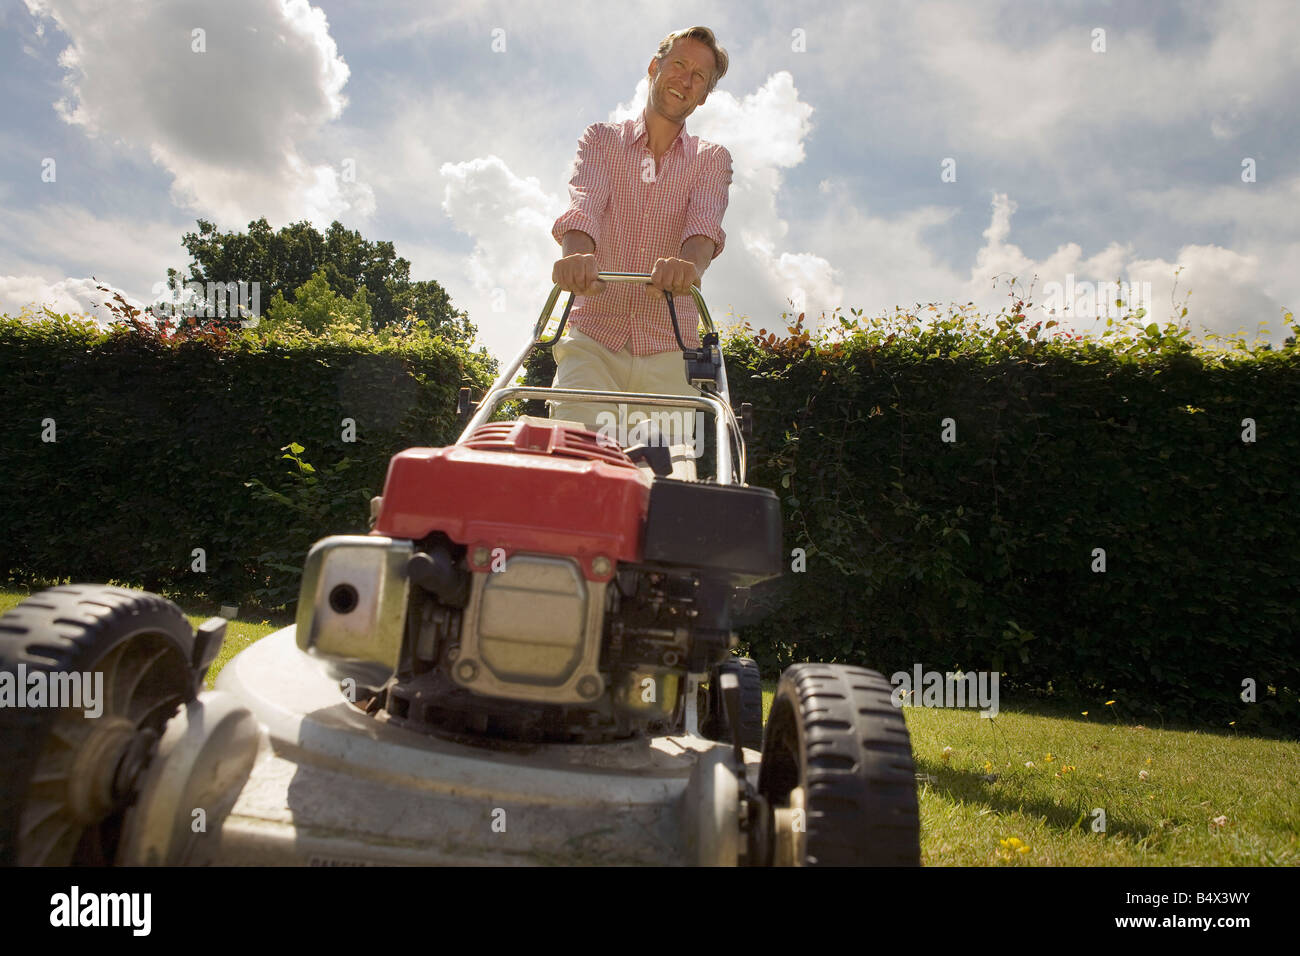 Man with push lawnmower, low angle Stock Photo